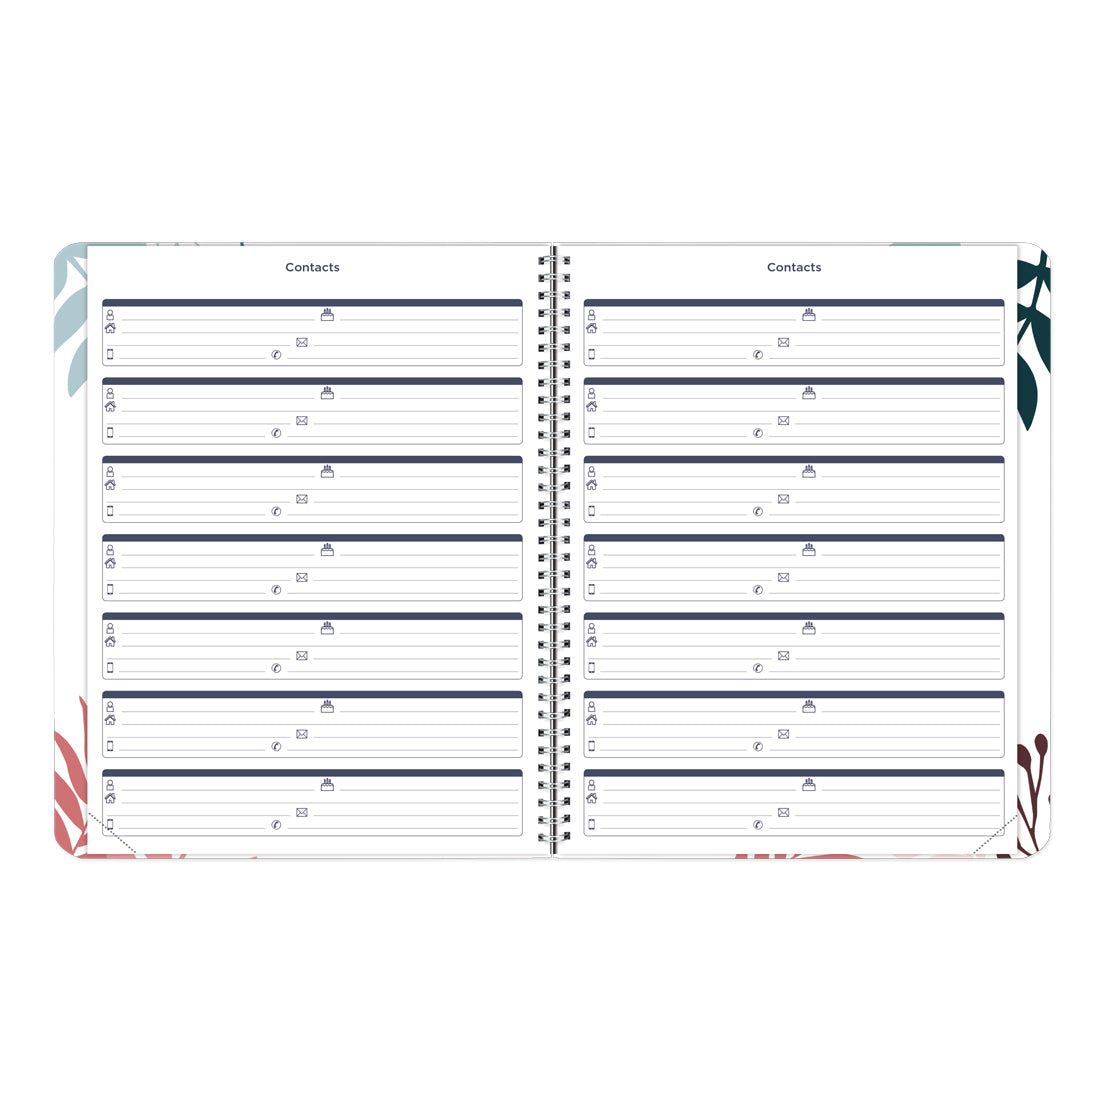 Meadow Monthly Planner 2024, Bilingual